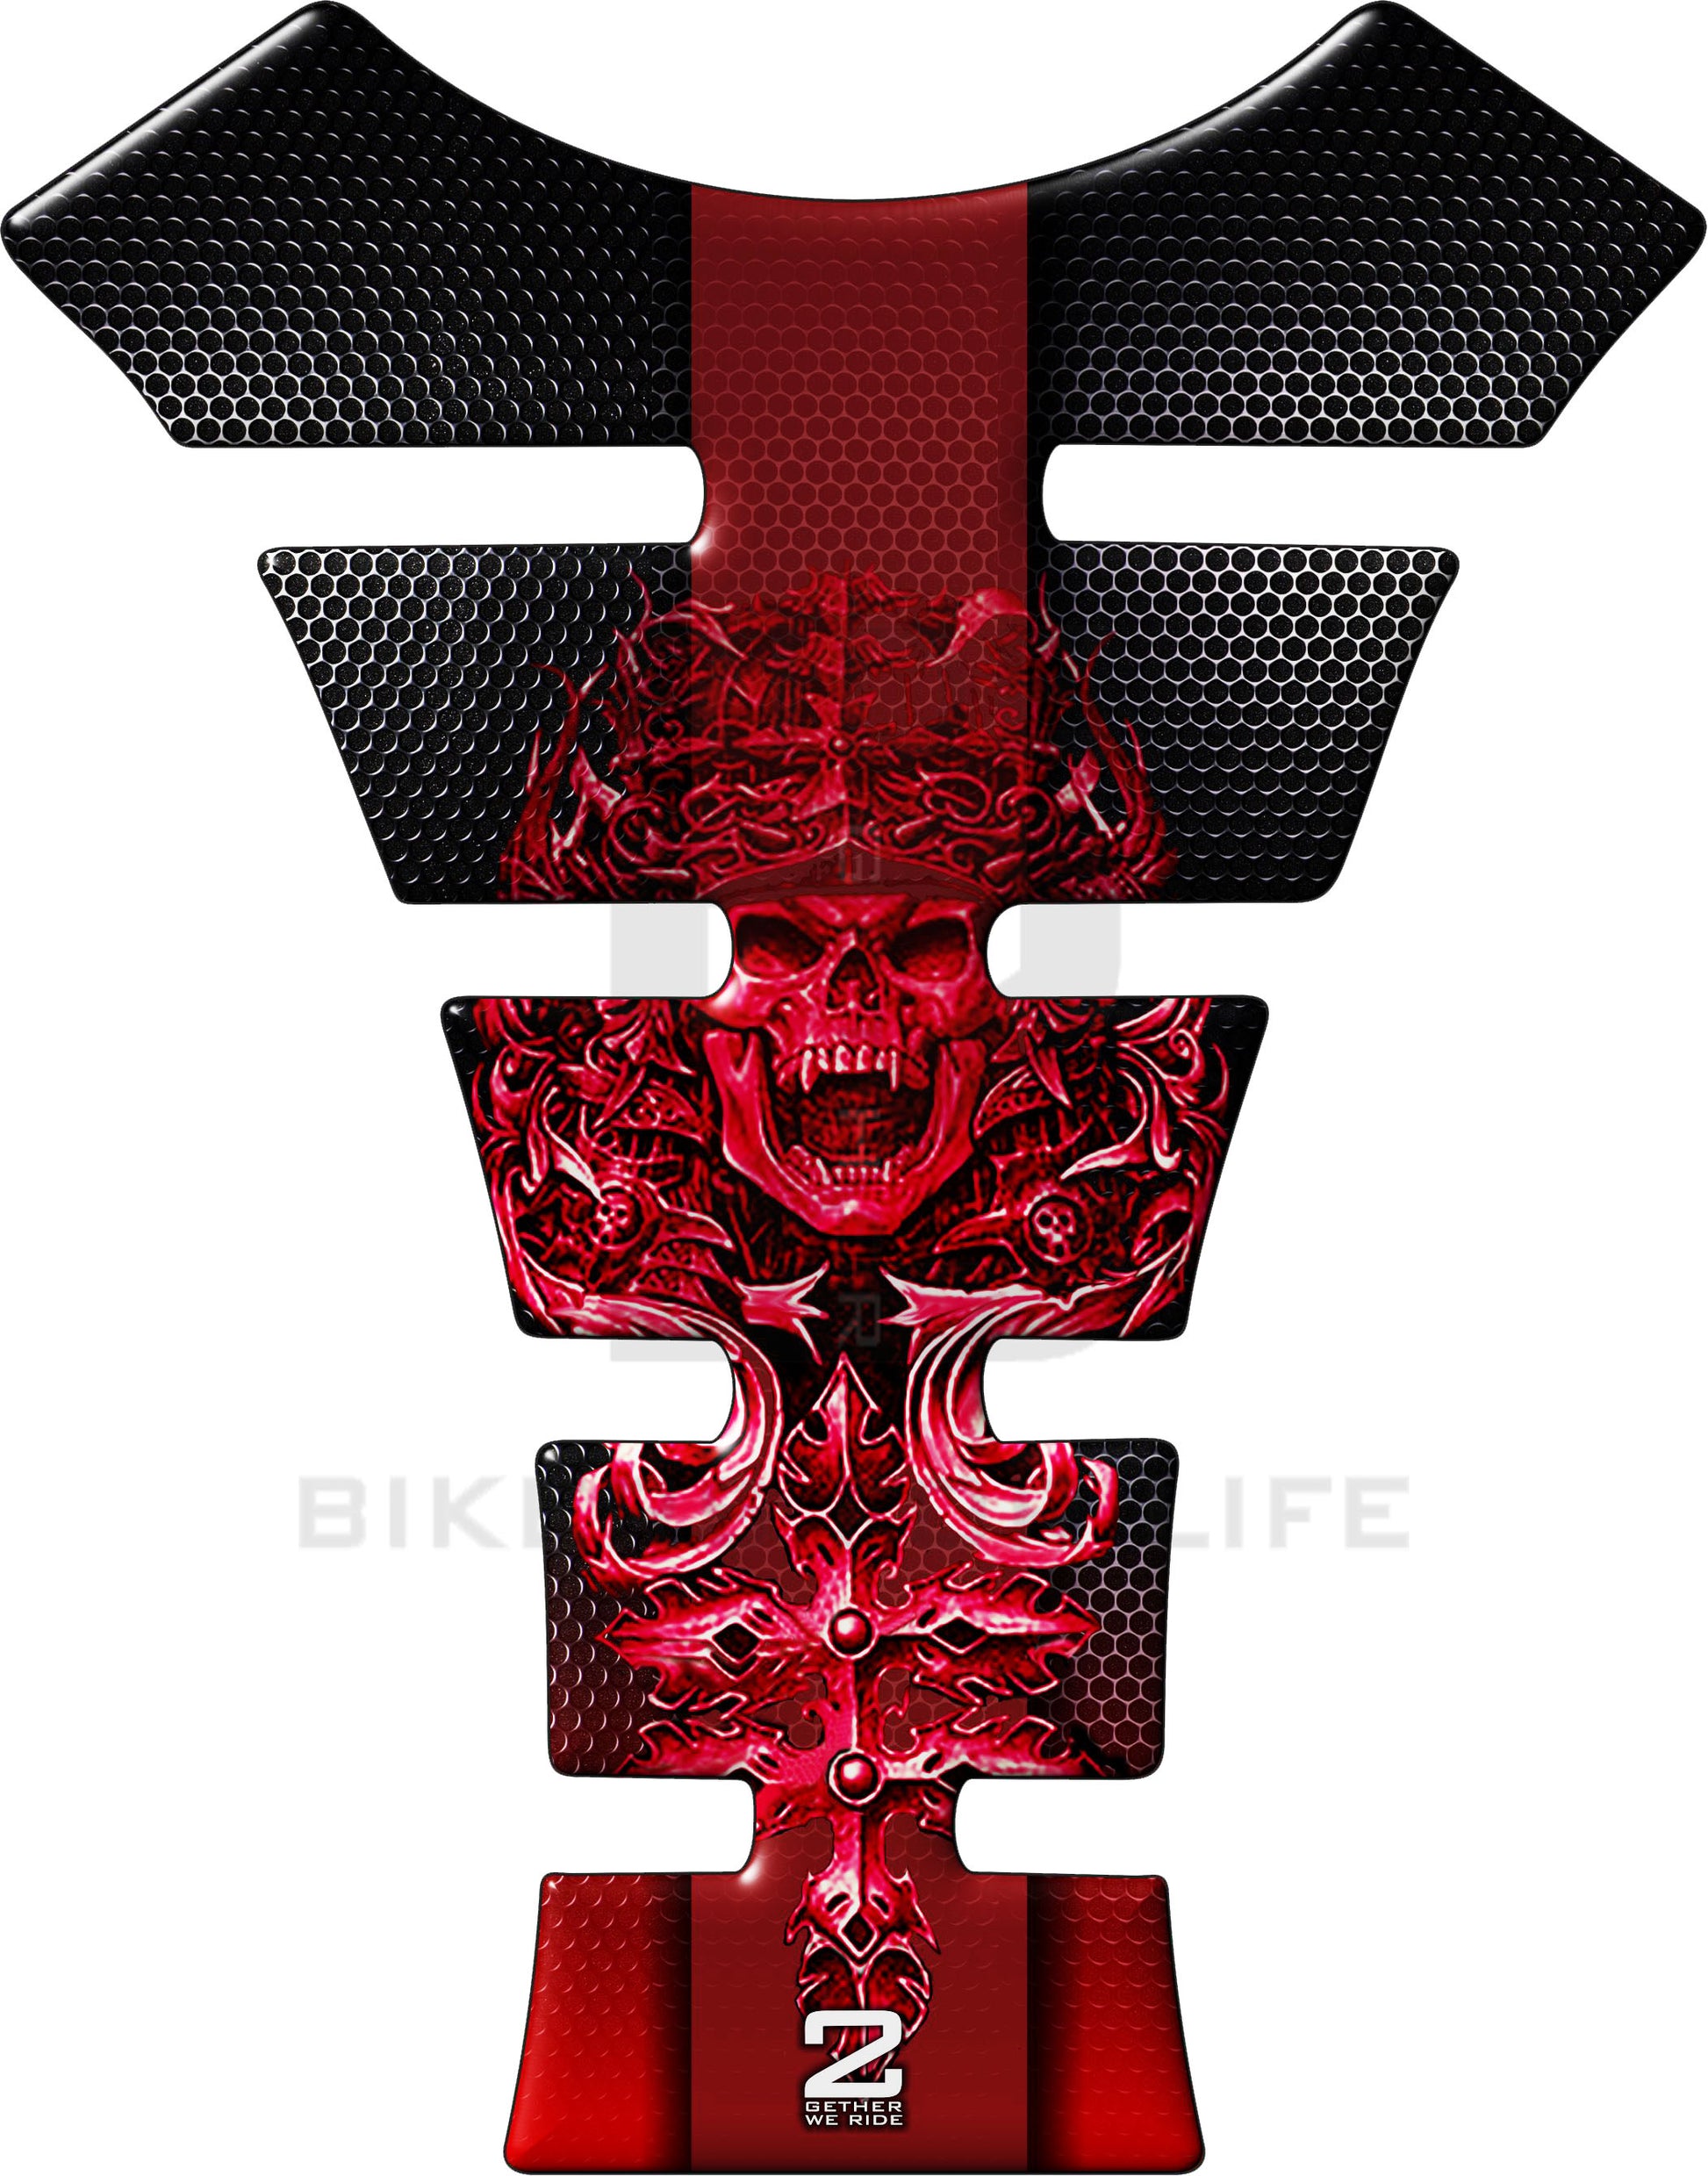 Universal Fit Red Mayan Skull  Motor Bike Tank Pad Protector. A Street Pad which fits most motorcycles.